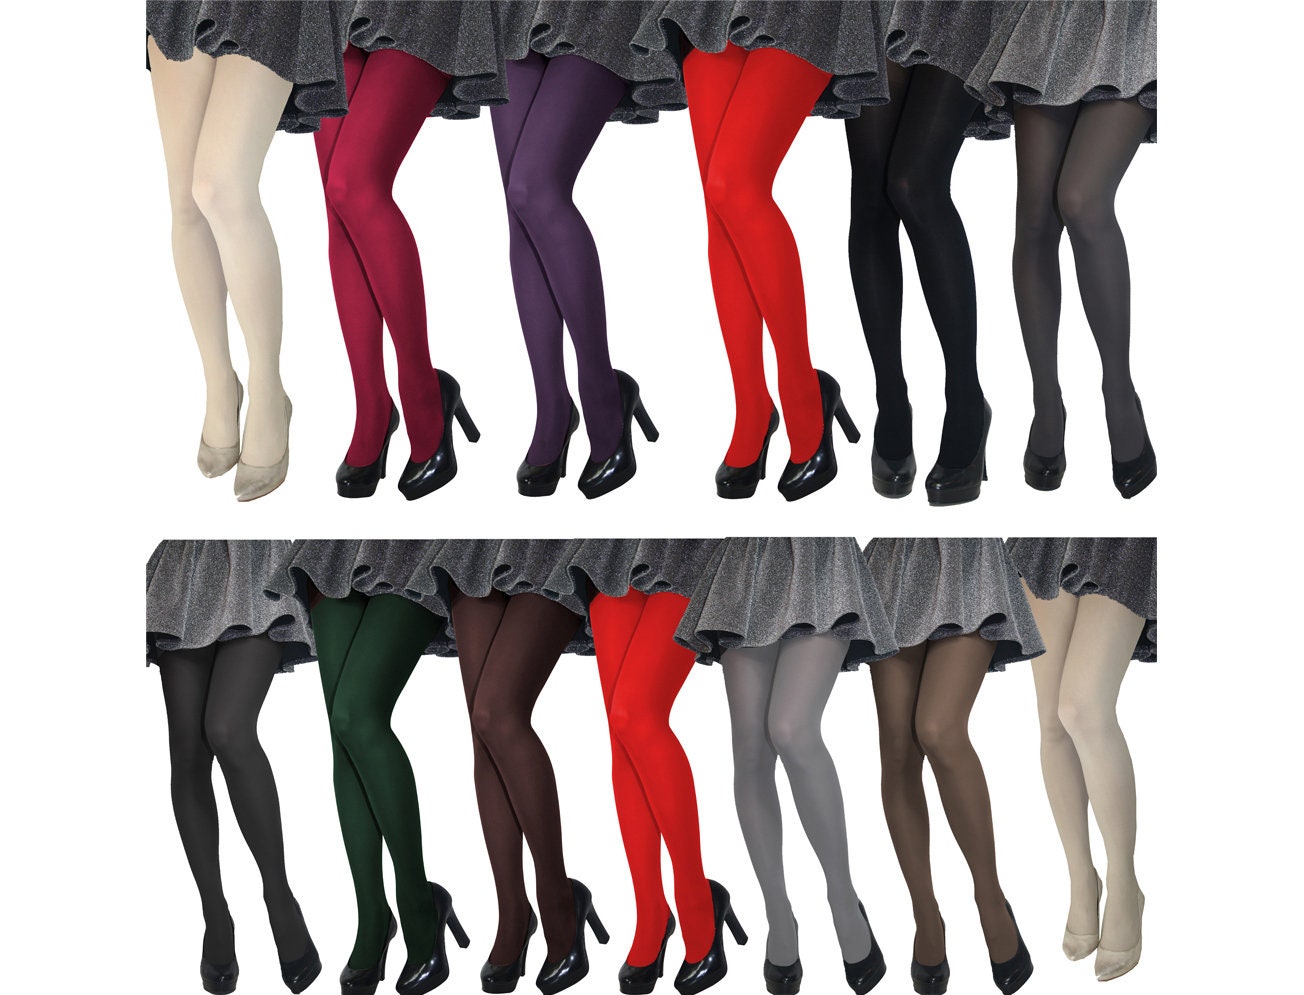 Wool Women's Black Tights. Winter Essentials. Warm and Soft. Elegant Fit.  Comfortable and Protective. Non Itchy. OEKO-TEX STANDARD 100. 